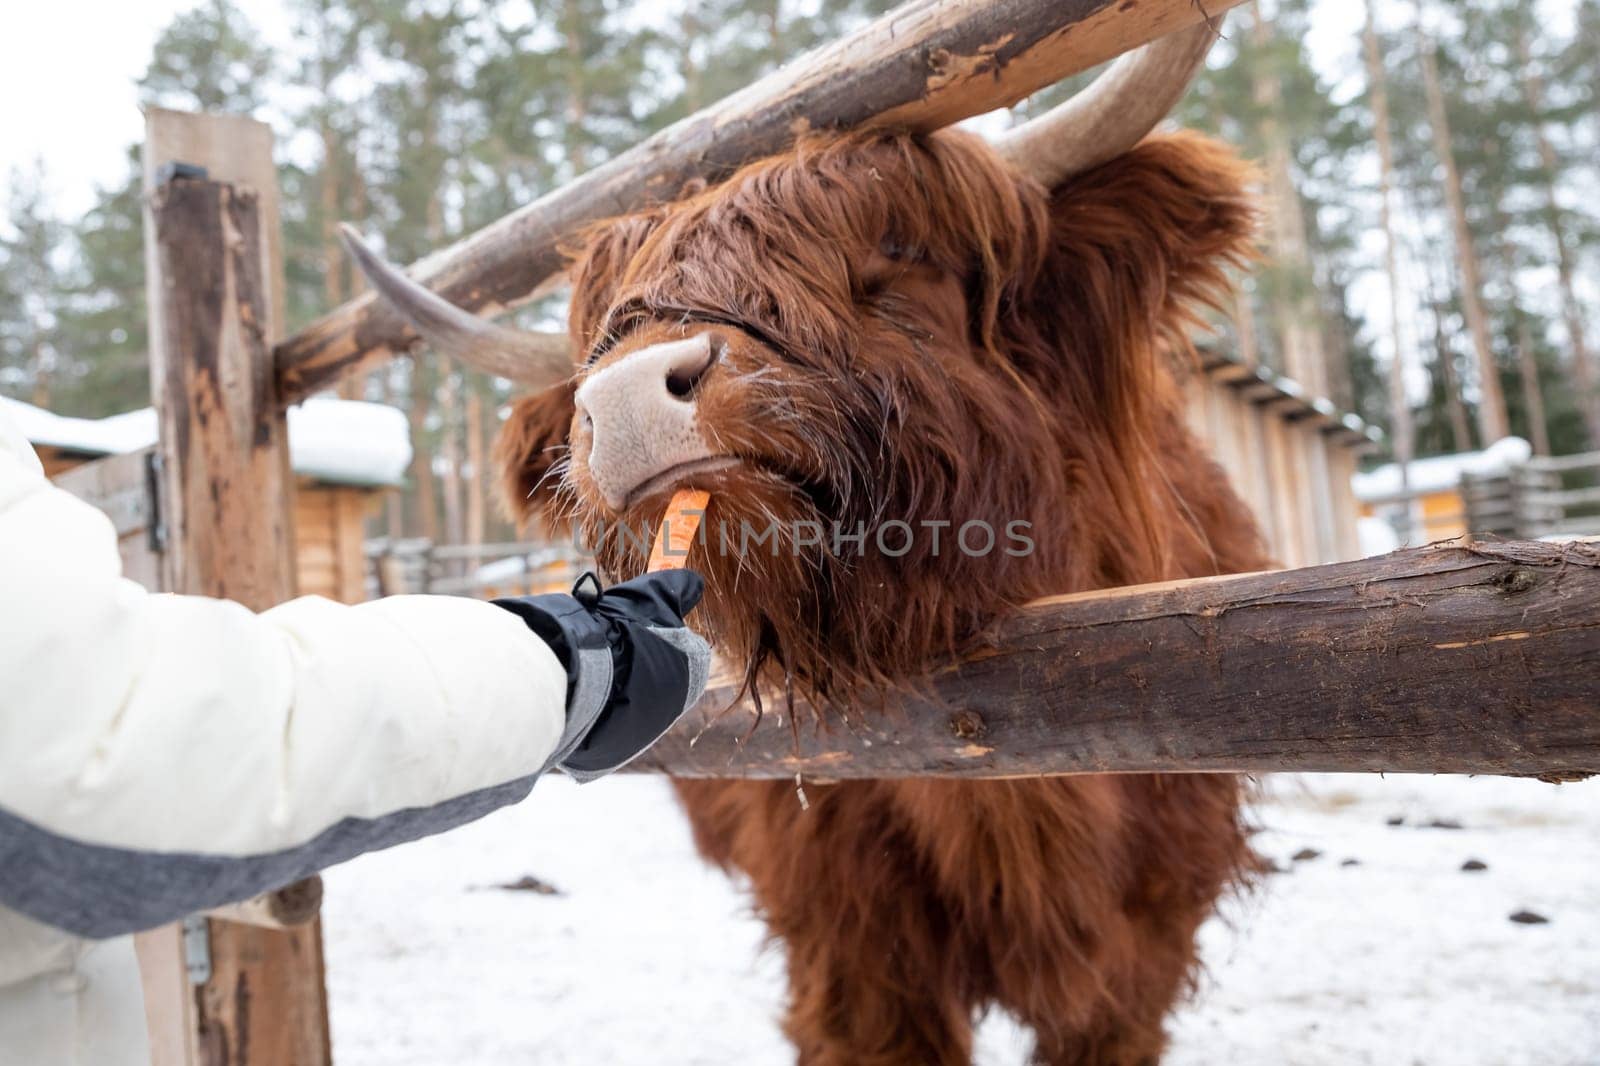 Scottish Highland cattle grazing in a pasture.Highland cow behind wooden fence opened its mouth and stuck out its tongue in anticipation of food. Contact zoo. Kid feeds Highland in winter zoo by YuliaYaspe1979